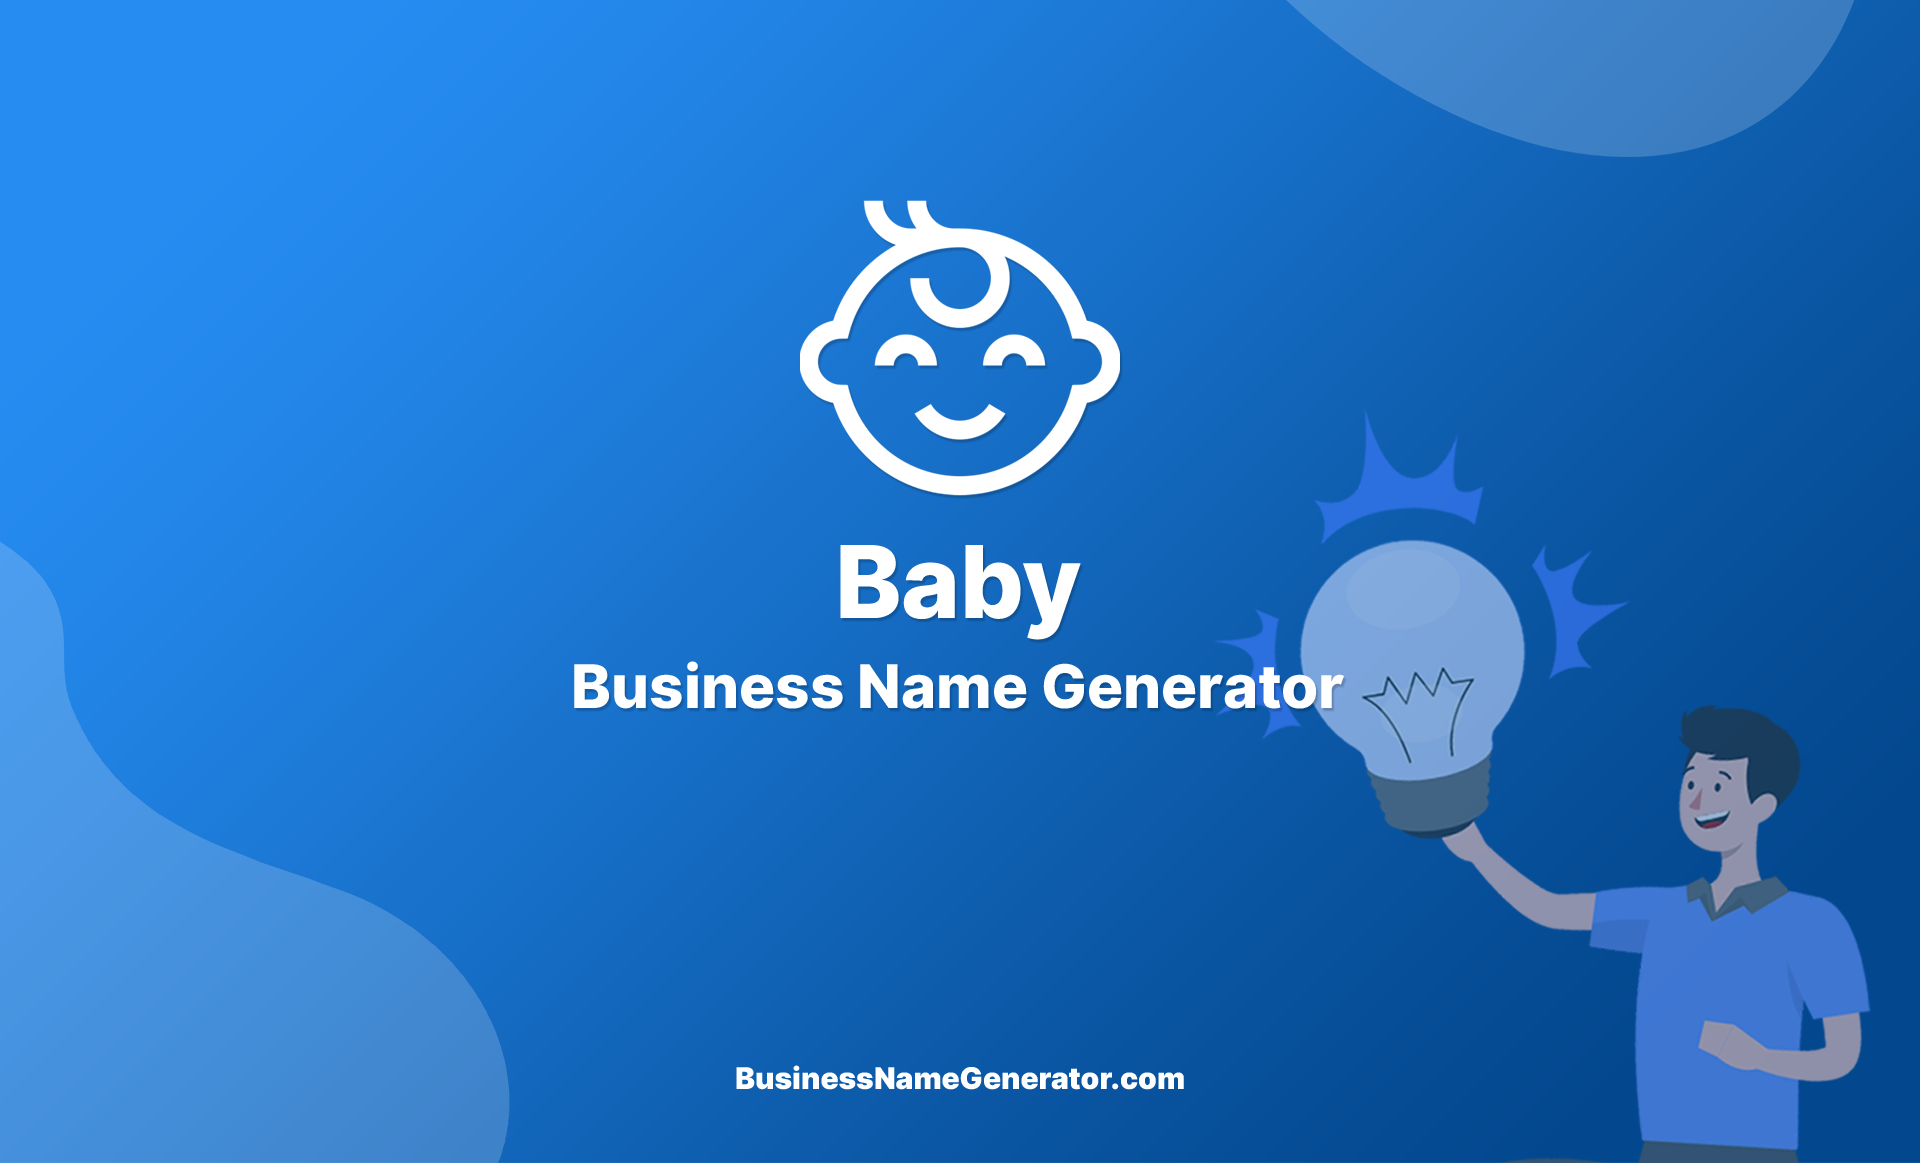 Baby Business Name Generator, Ideas & Guide